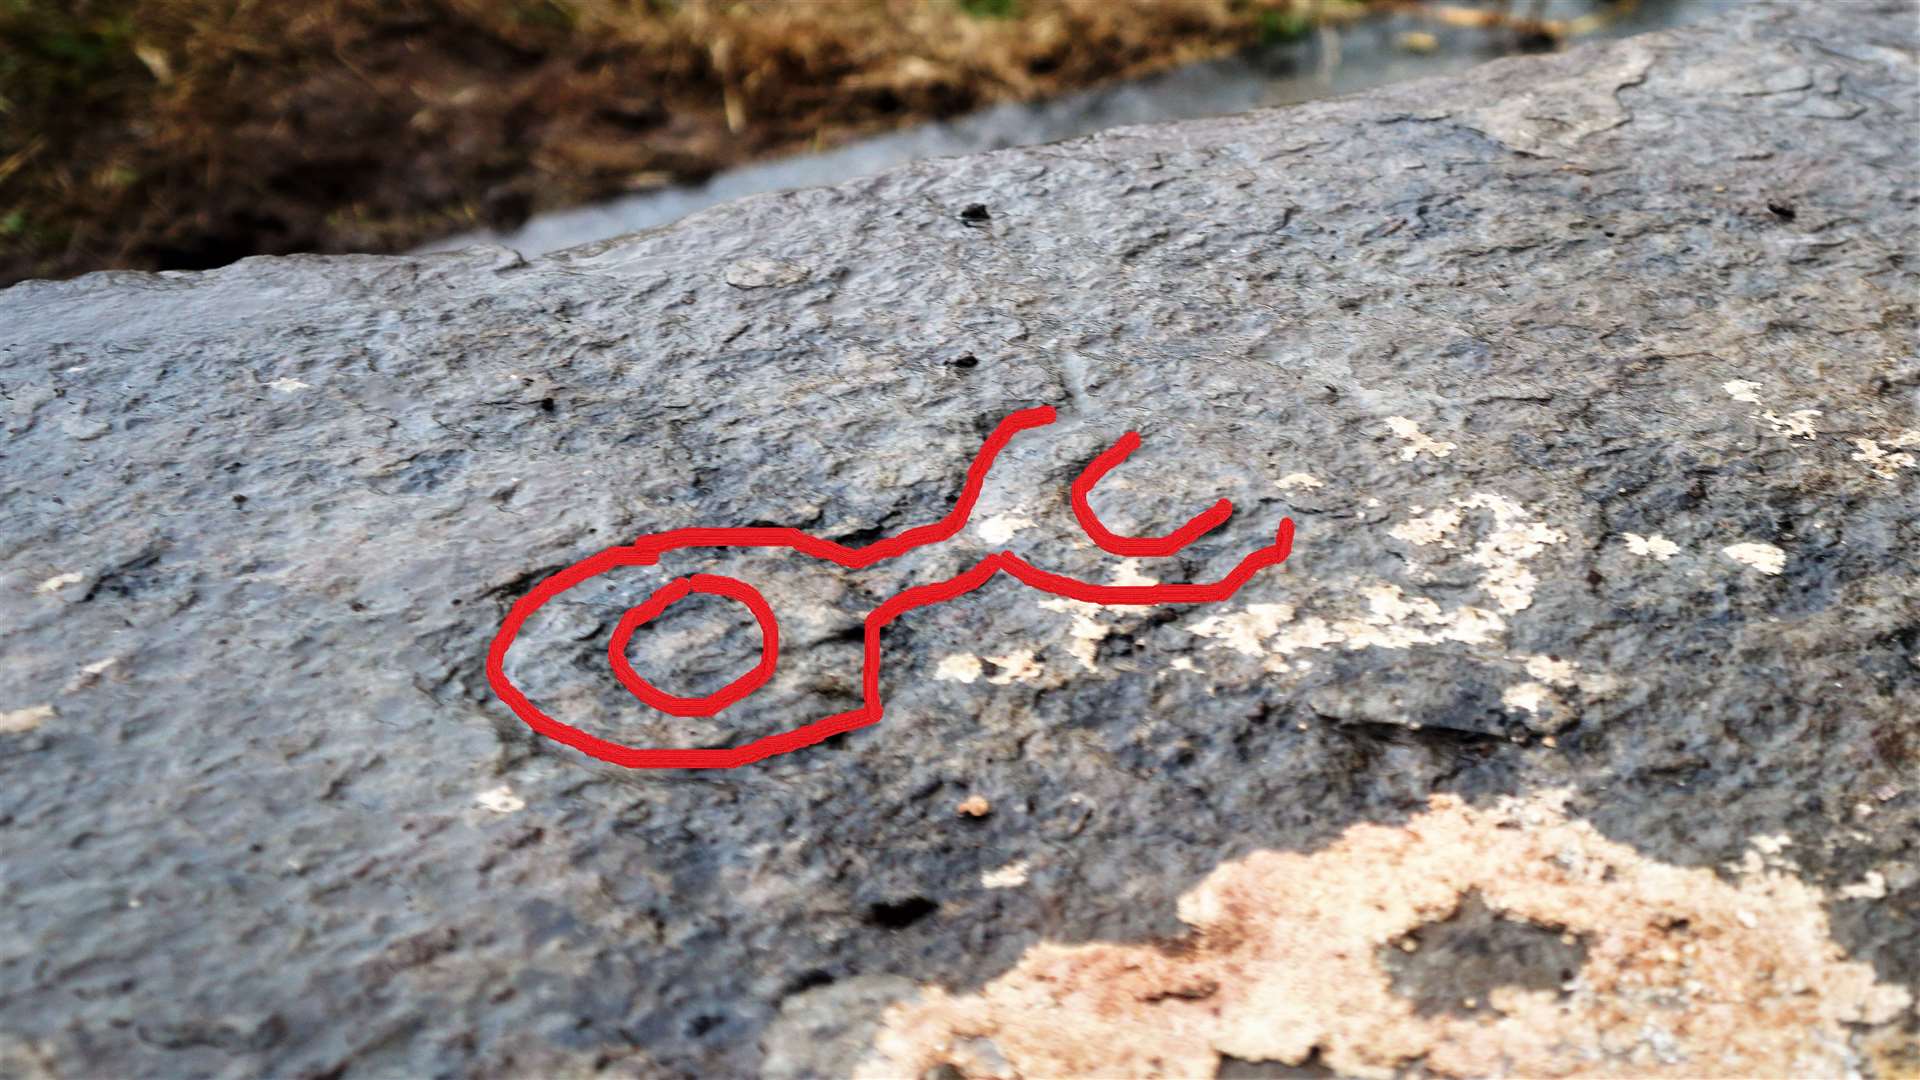 The slab's markings highlighted in red. Some of the lines are covered with lichens and will hopefully be clearer after restoration work is carried out.